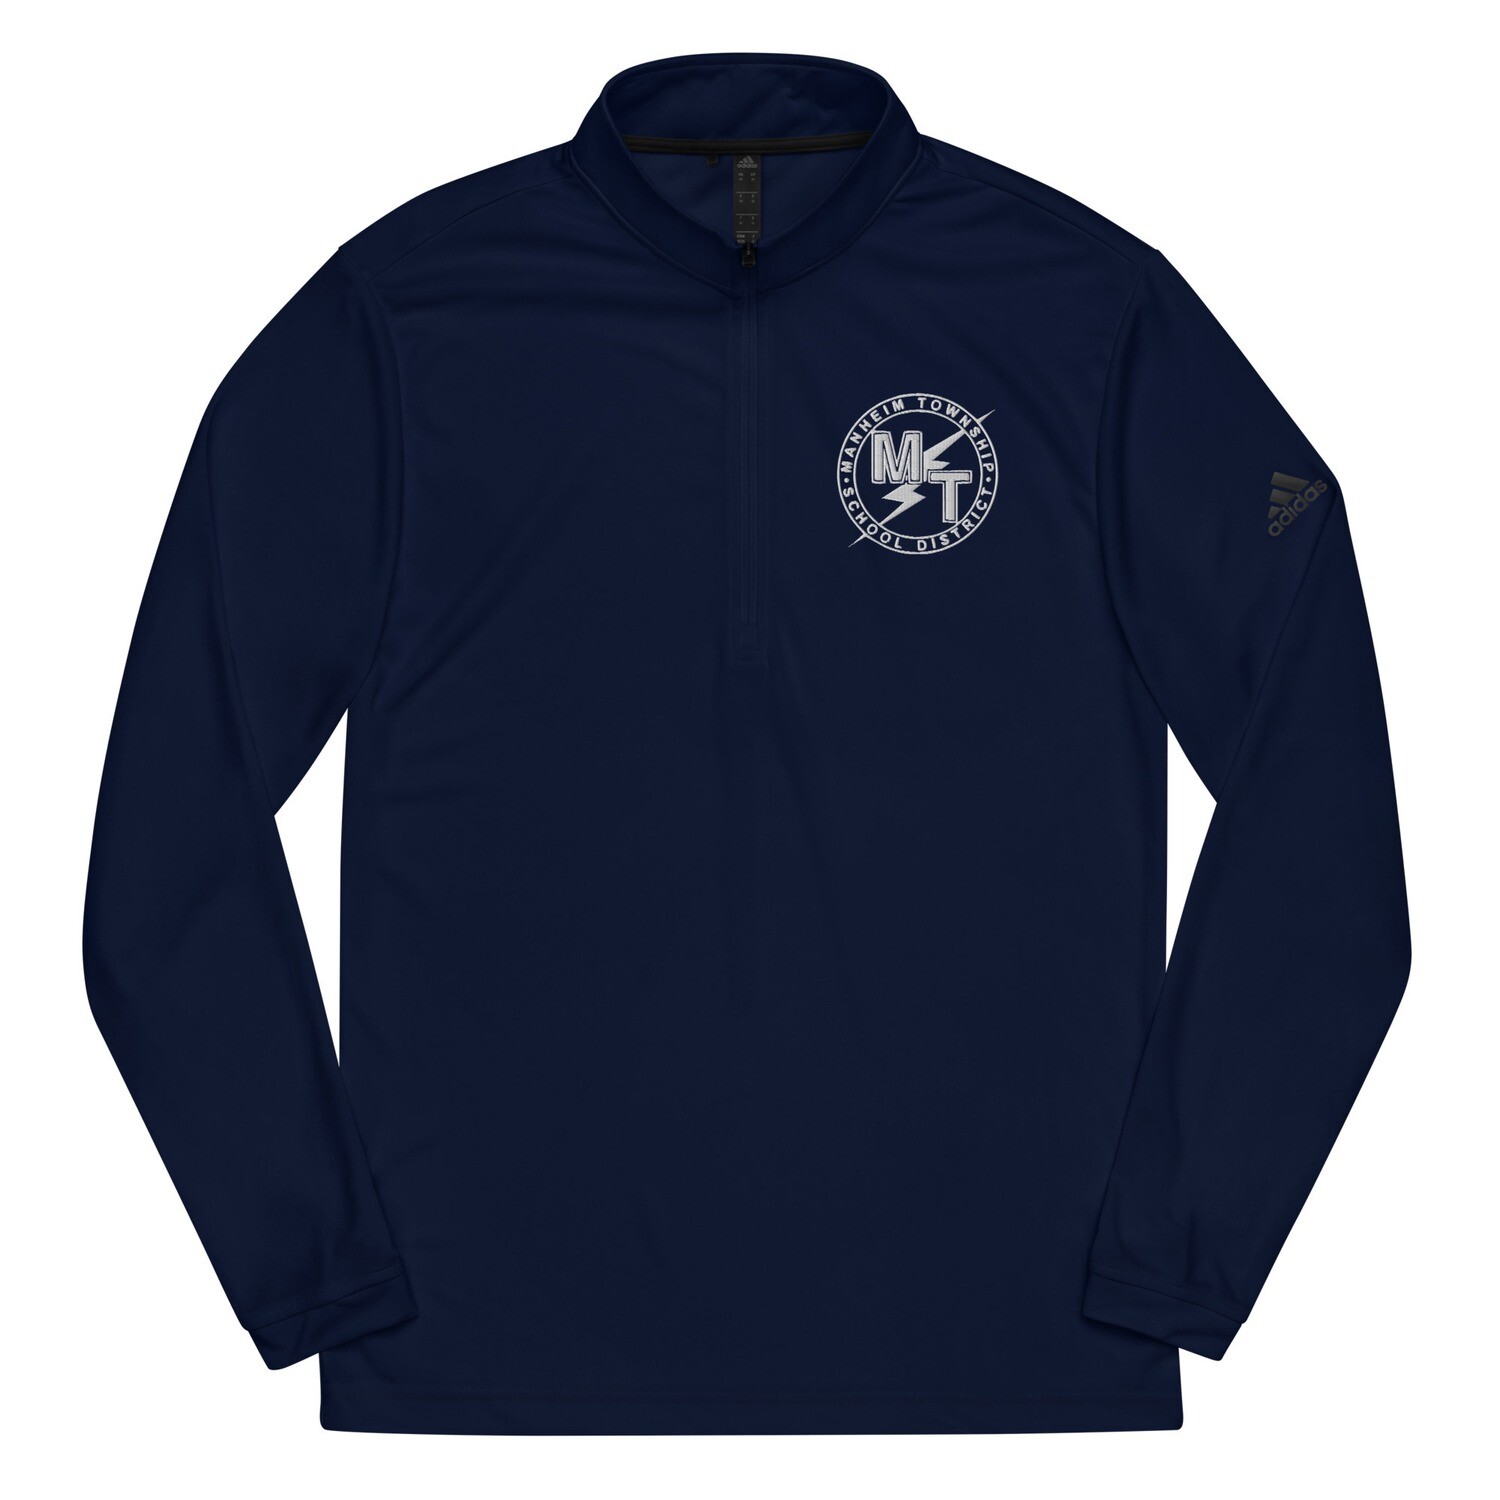 Township Logo Embroidered Adidas Quarter zip pullover